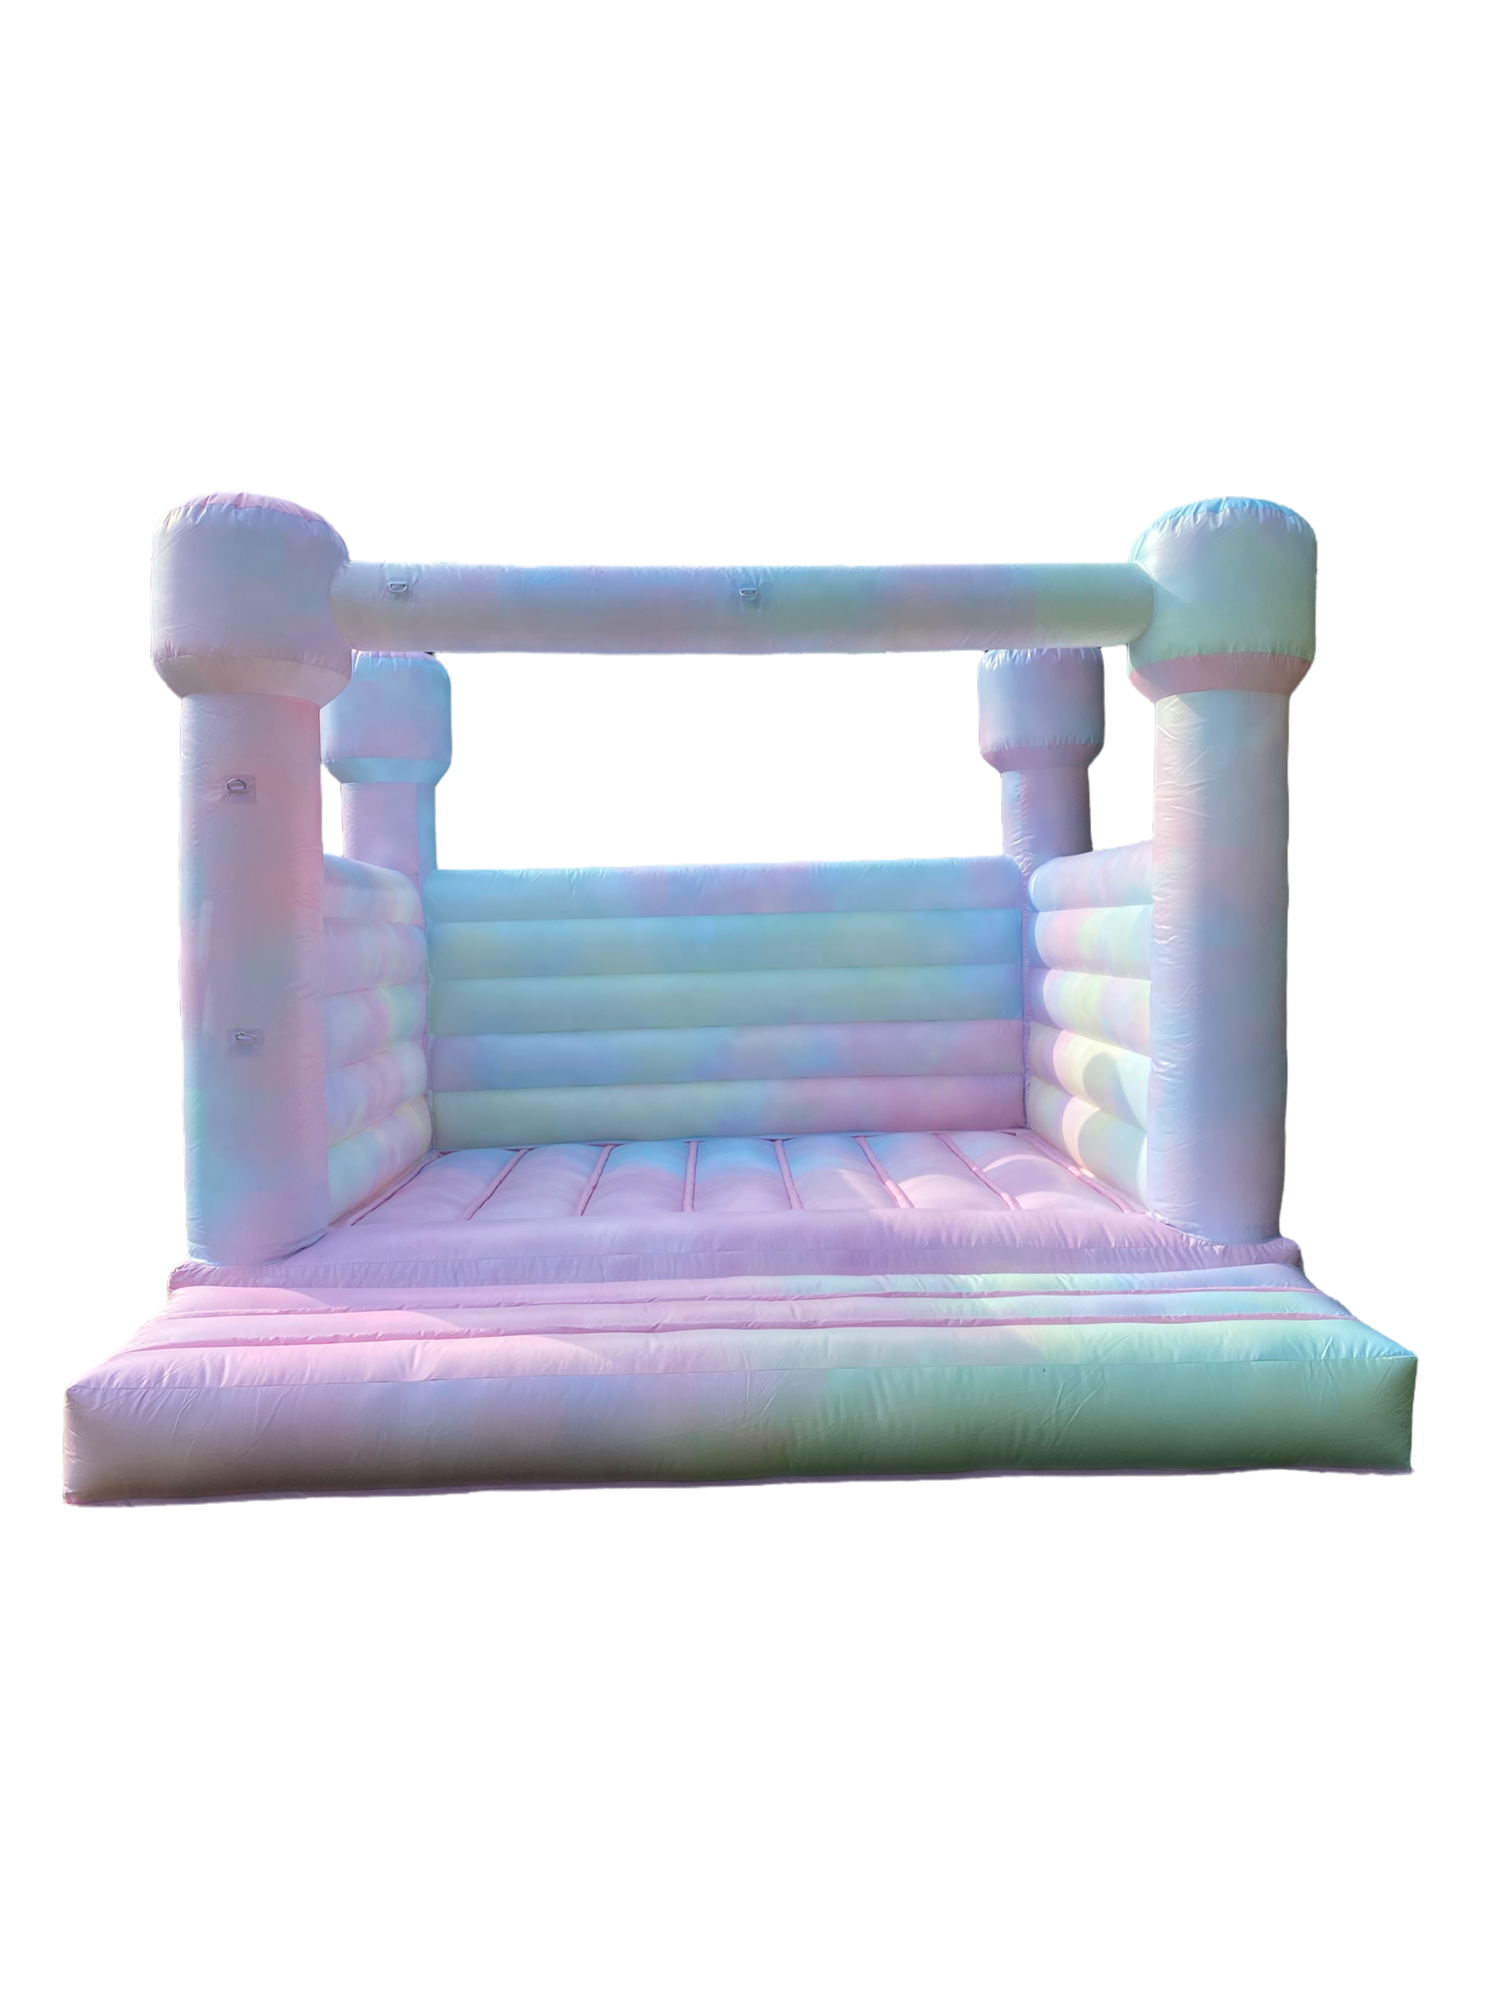 Confetti Bounce, DFW Metroplex premiere bounce house, bubble house and event rental company providing party essentials for all needs and sizes.